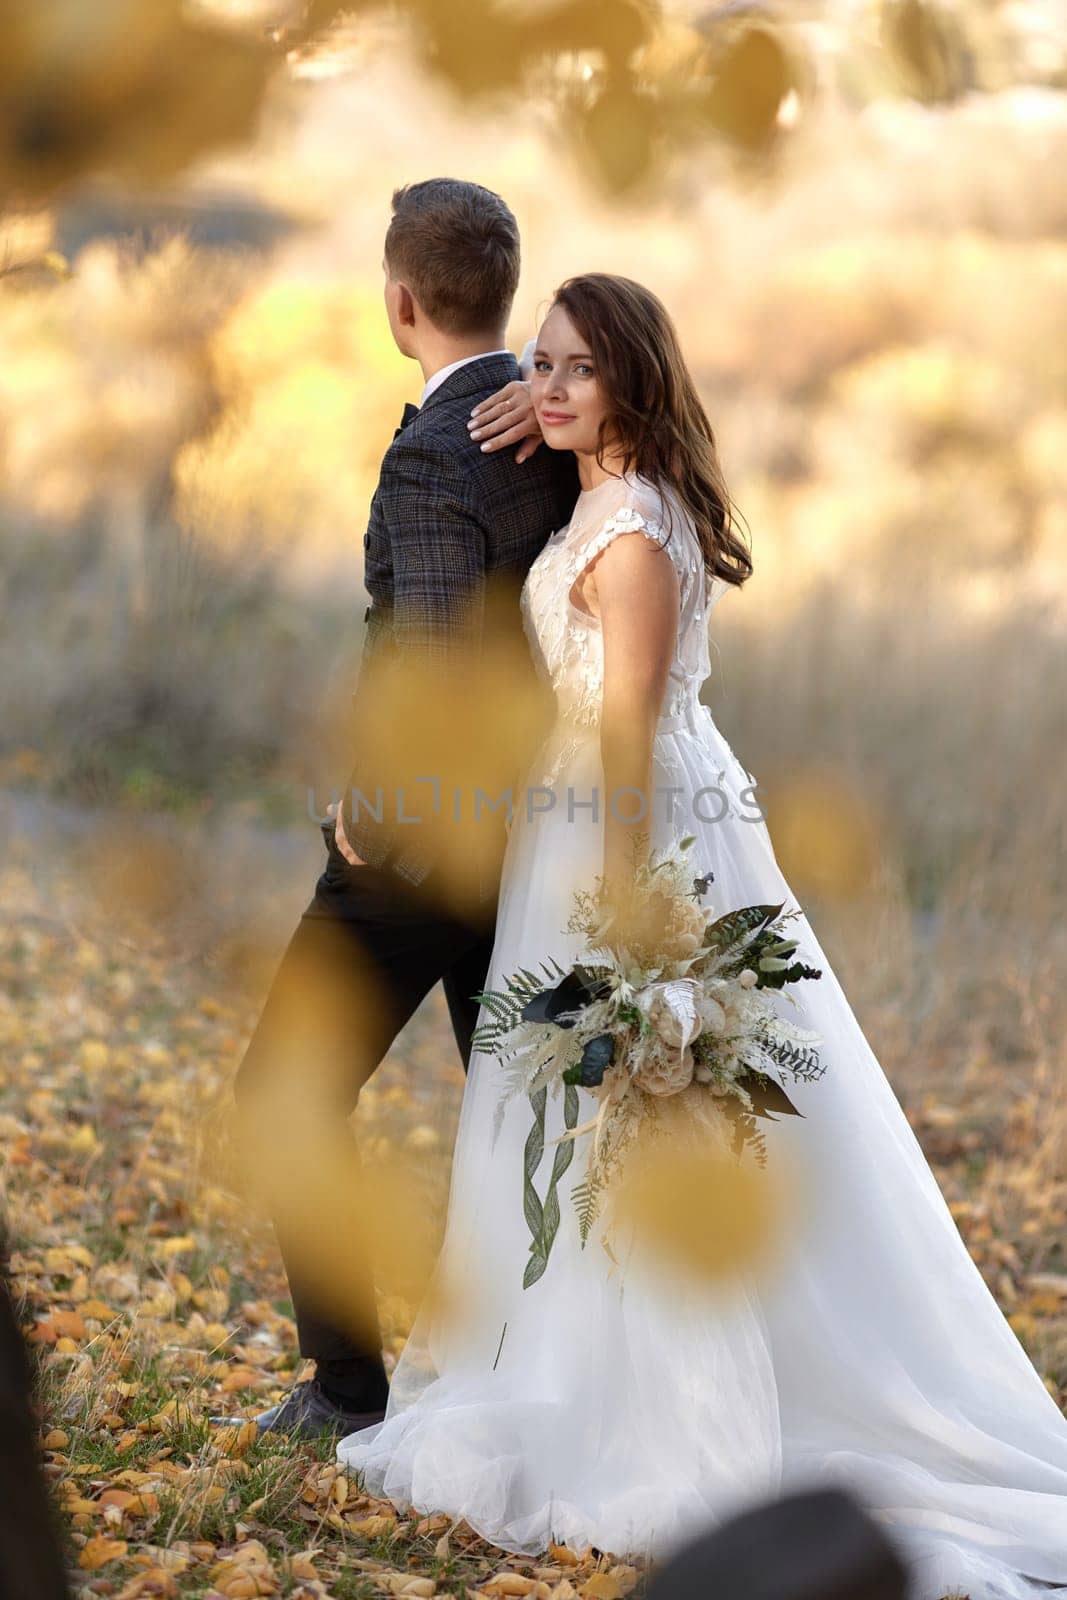 Groom and bride together standing outdoor on natural background